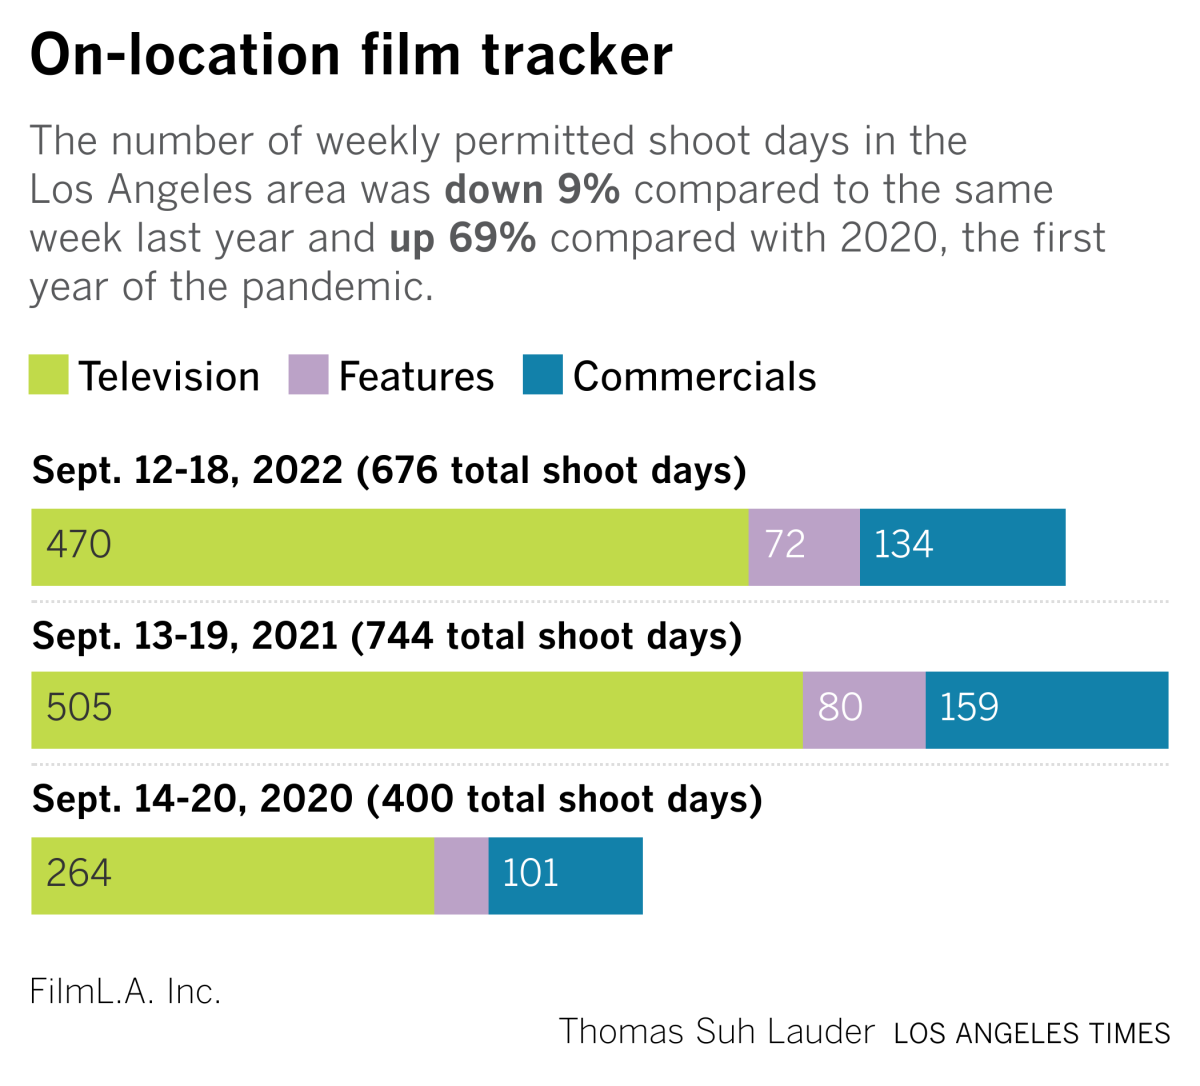 A chart showing the number film shoots in Los Angeles for the week of Sept. 12-18, 2022, compared to previous years.